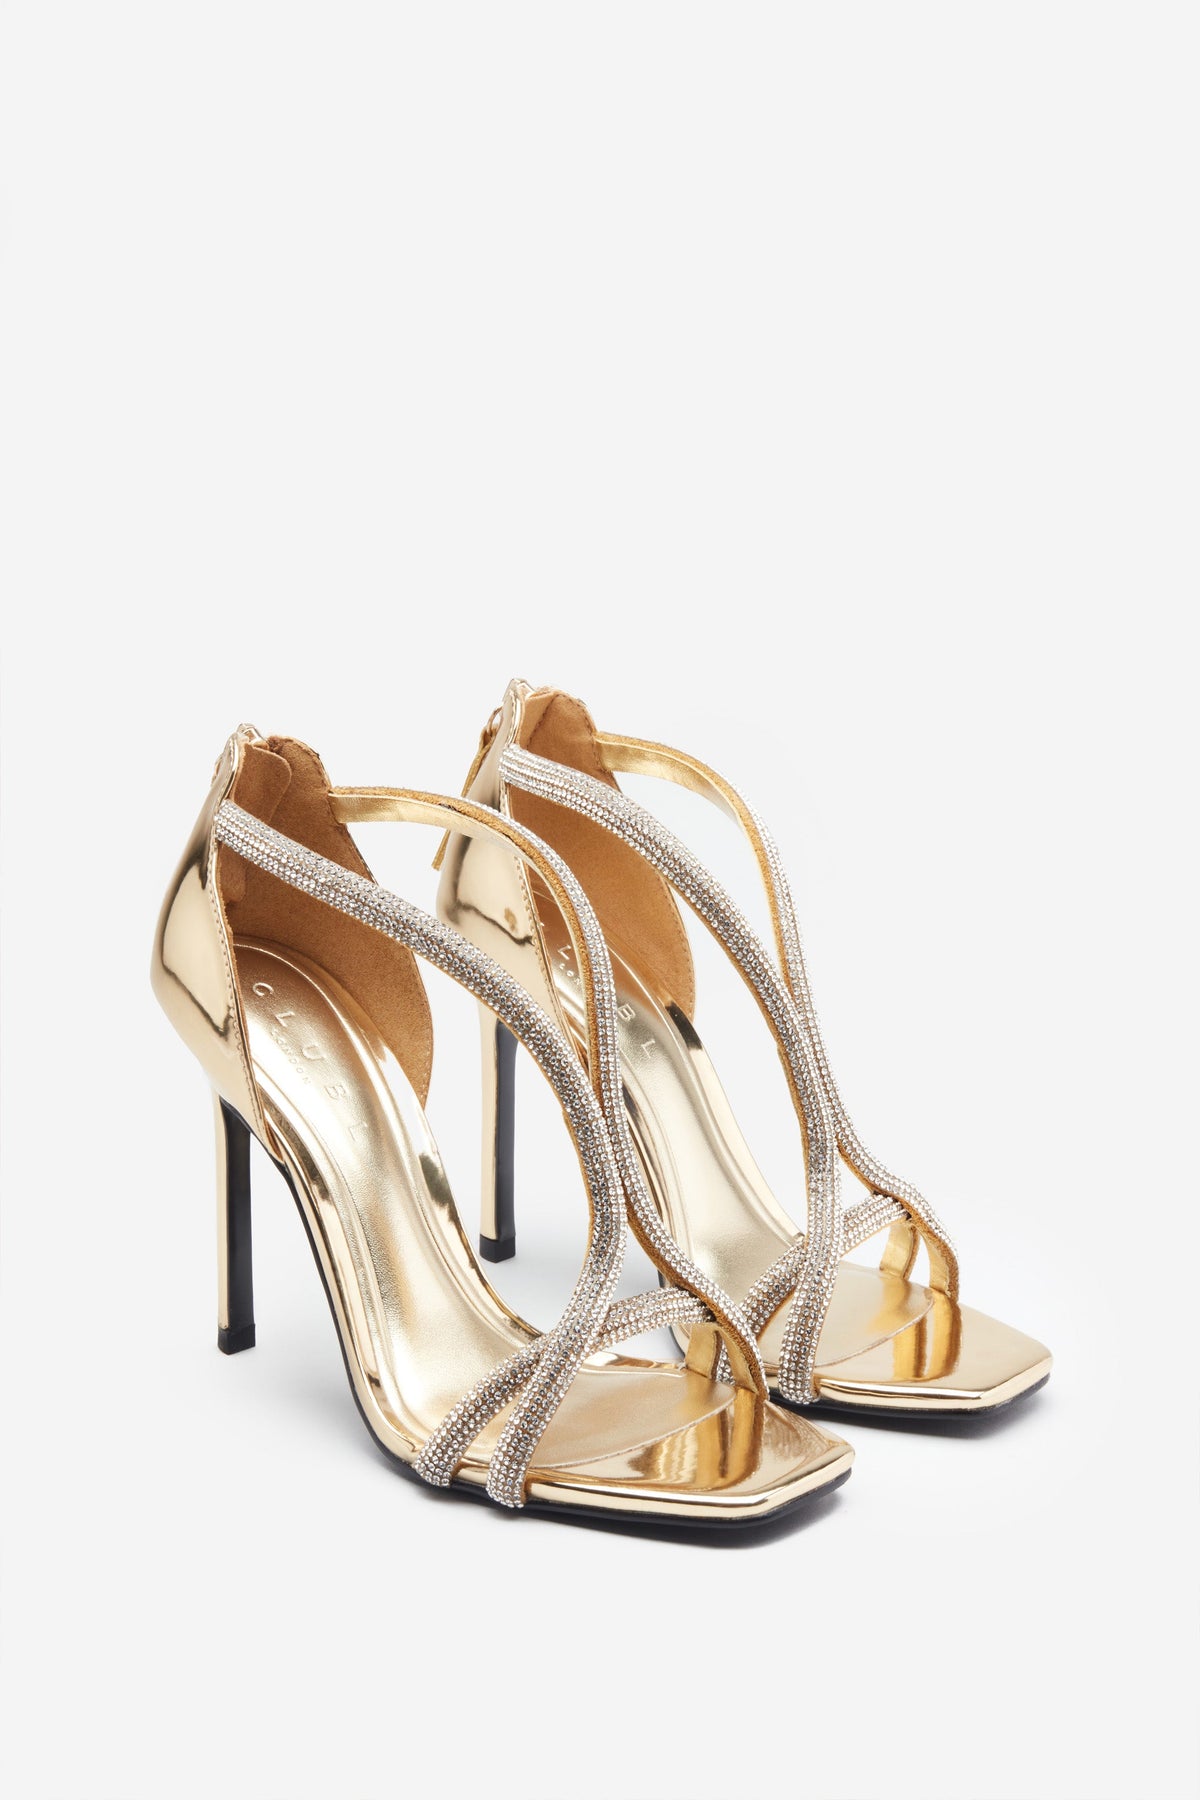 Silver Metallic Cap Ankle-Strap Heeled Sandals - CHARLES & KEITH IN